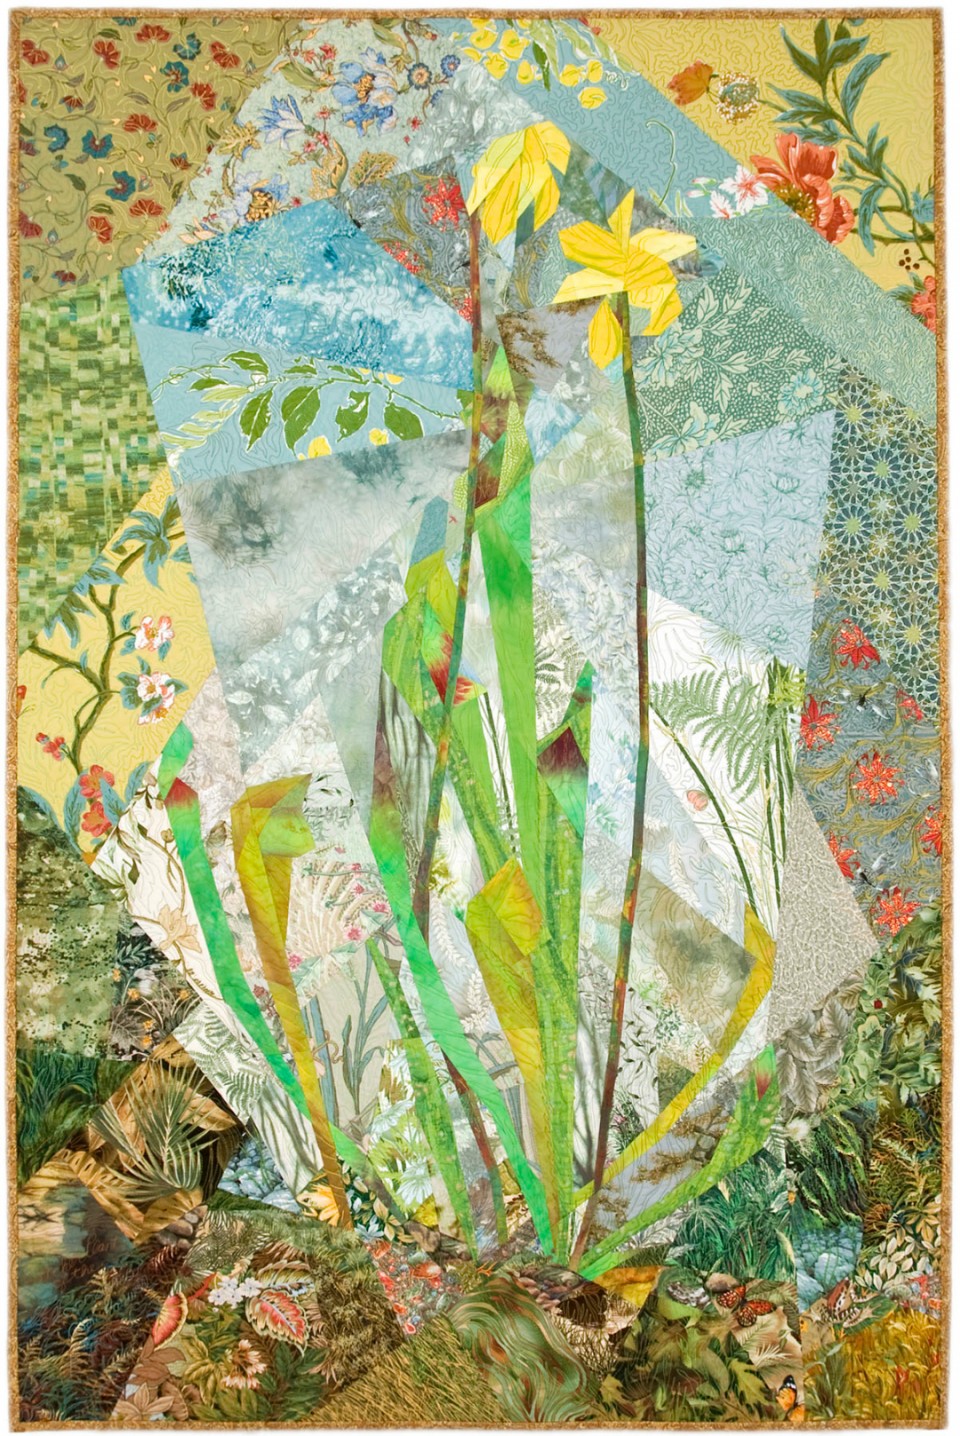 Ann Harwell, Pitcher Plants of the Pocosins, quilted tapestry, 38 x 58